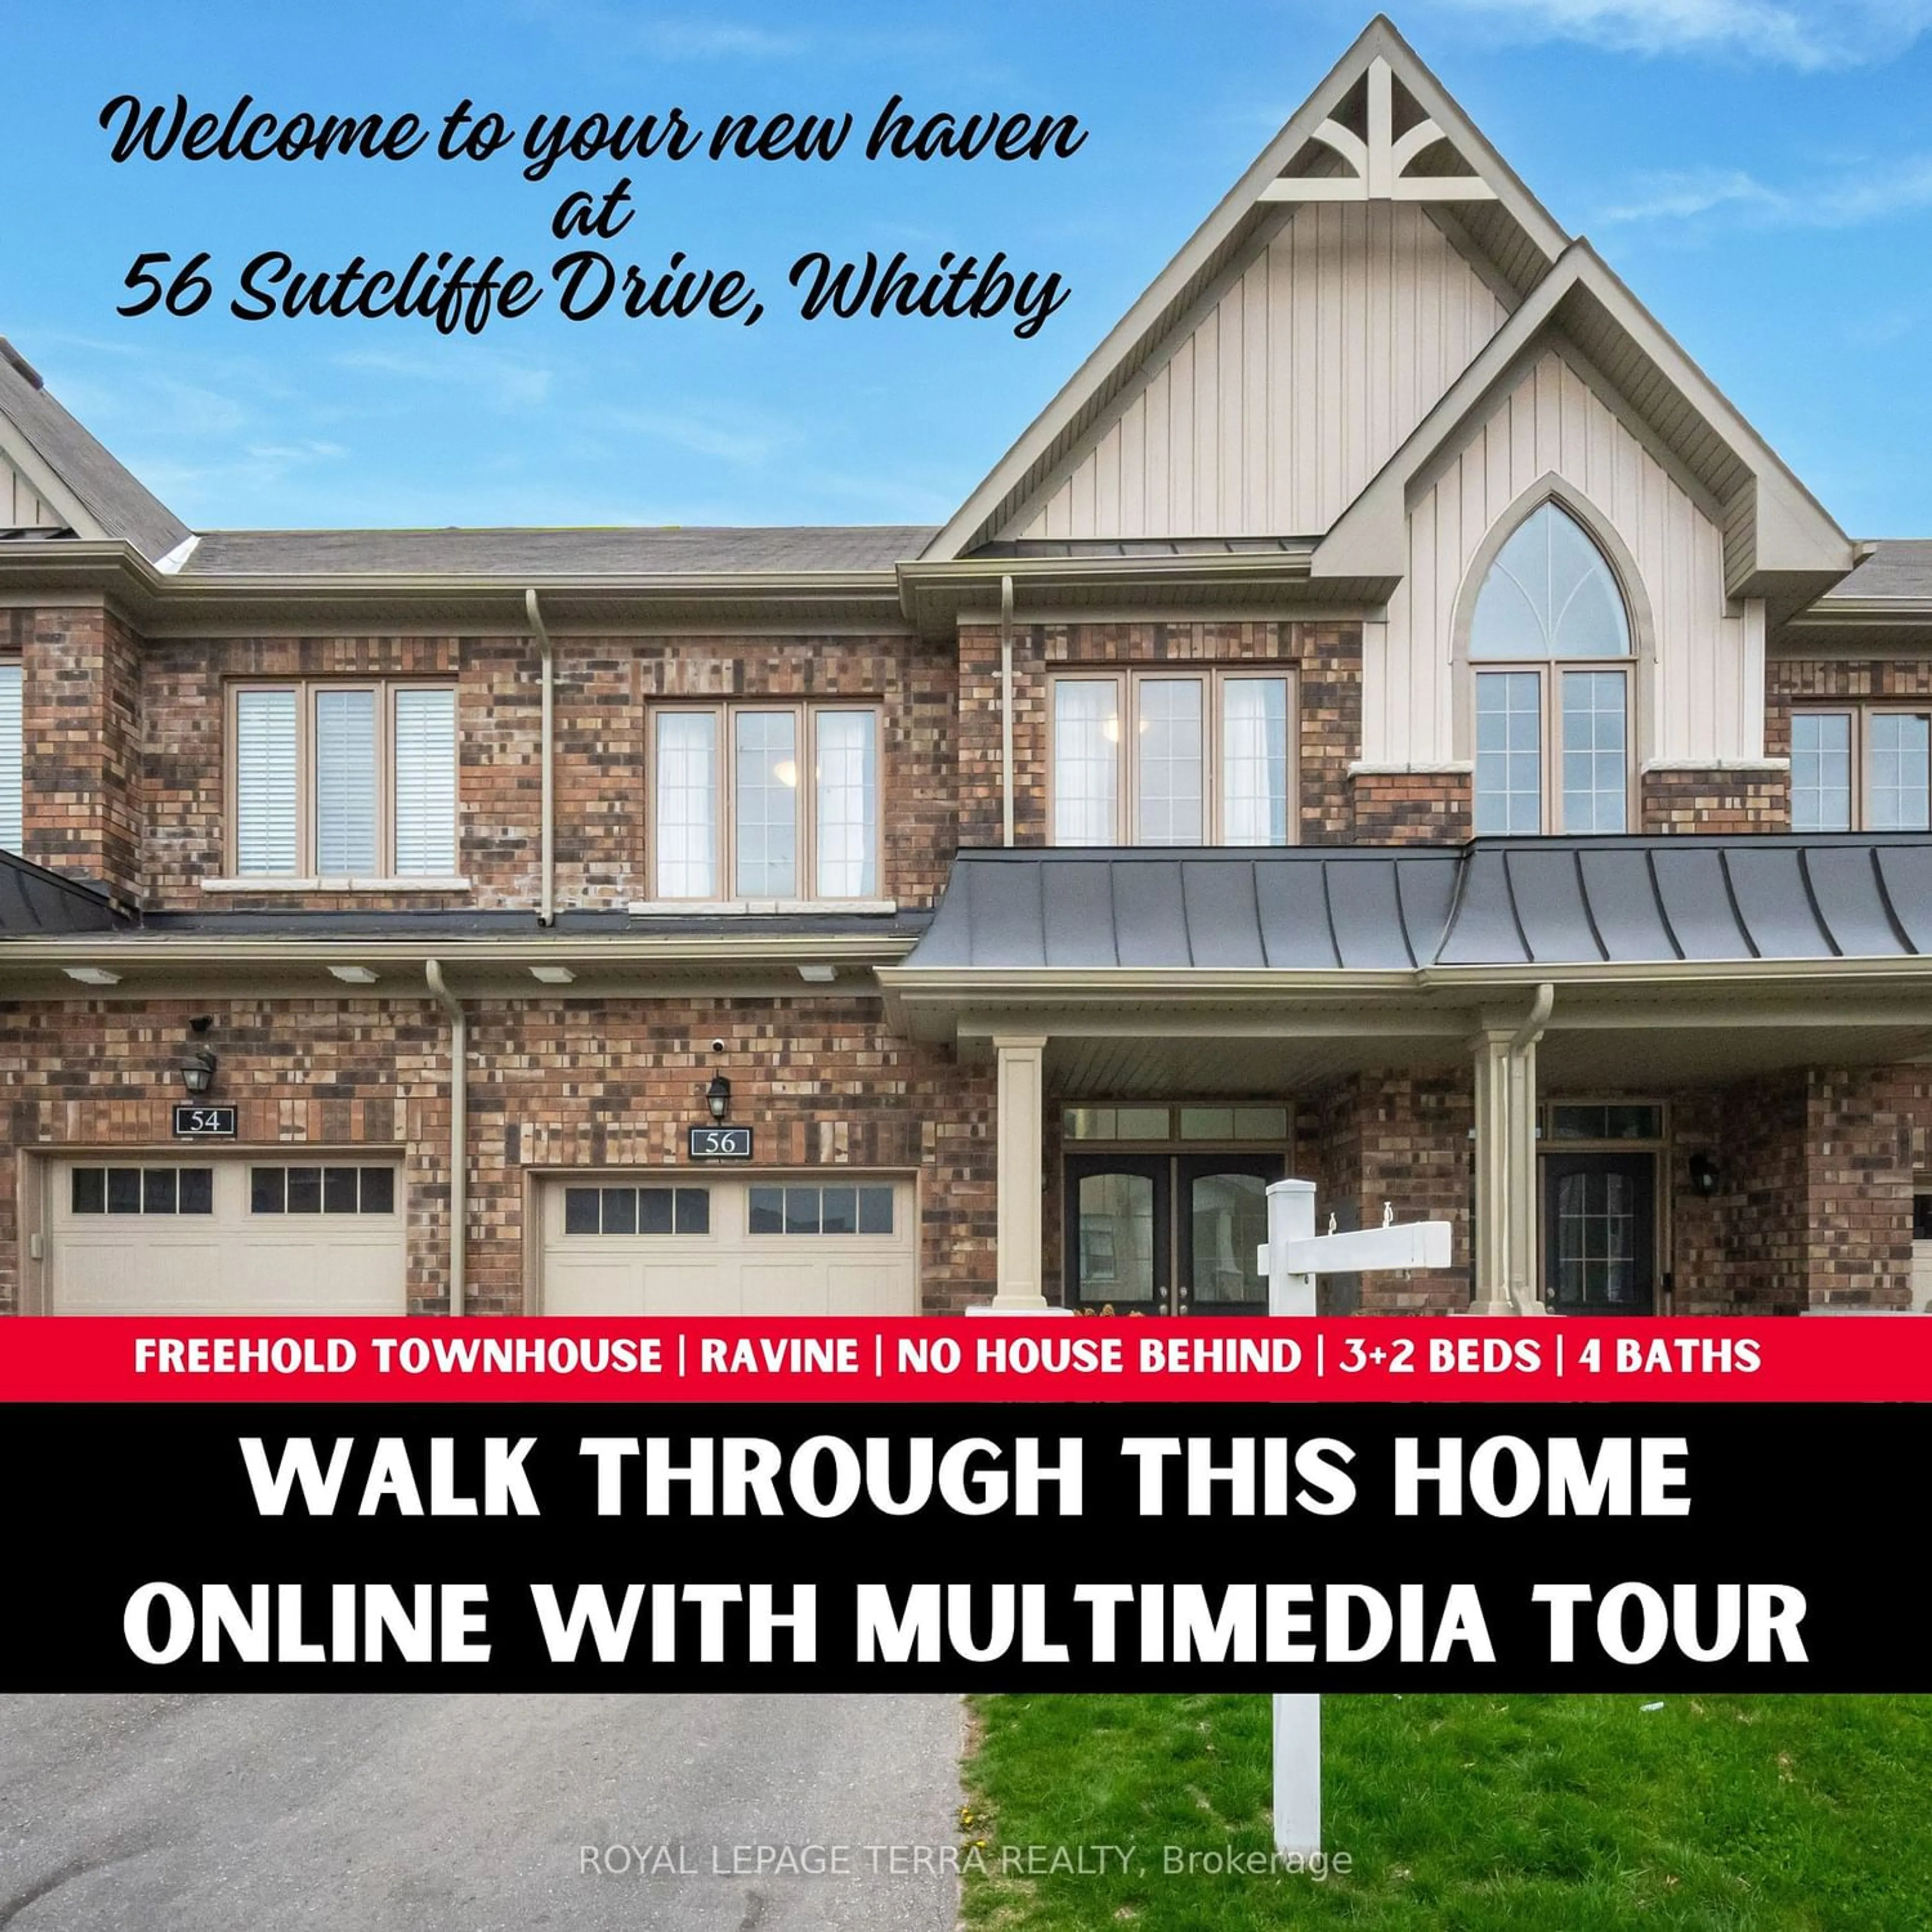 Indoor entryway for 56 Sutcliffe Dr, Whitby Ontario L1R 0R1